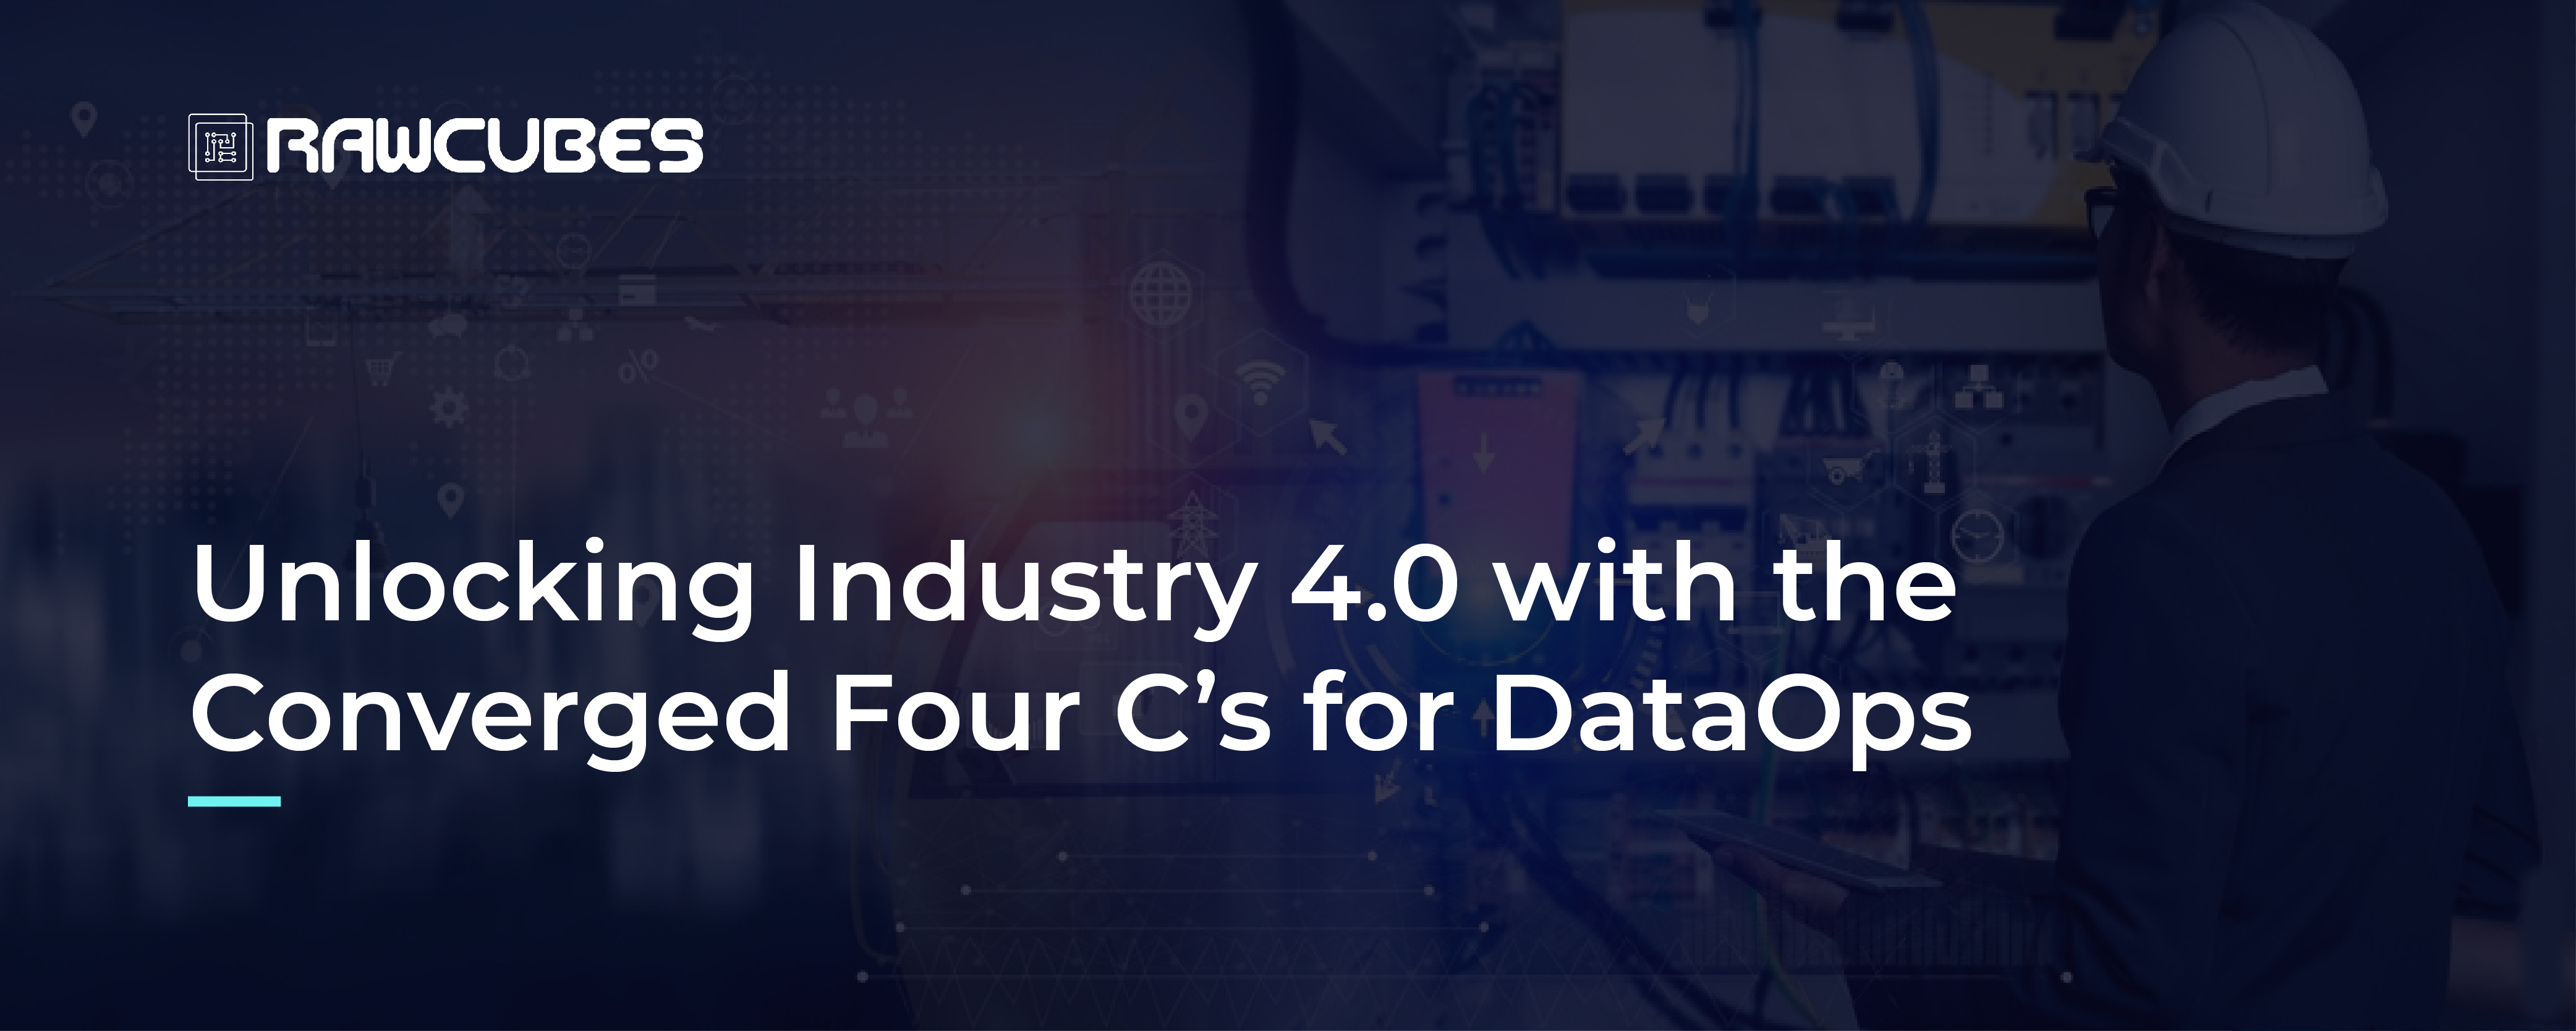 Unlocking Industry 4.0 with the Converged Four C’s for DataOps